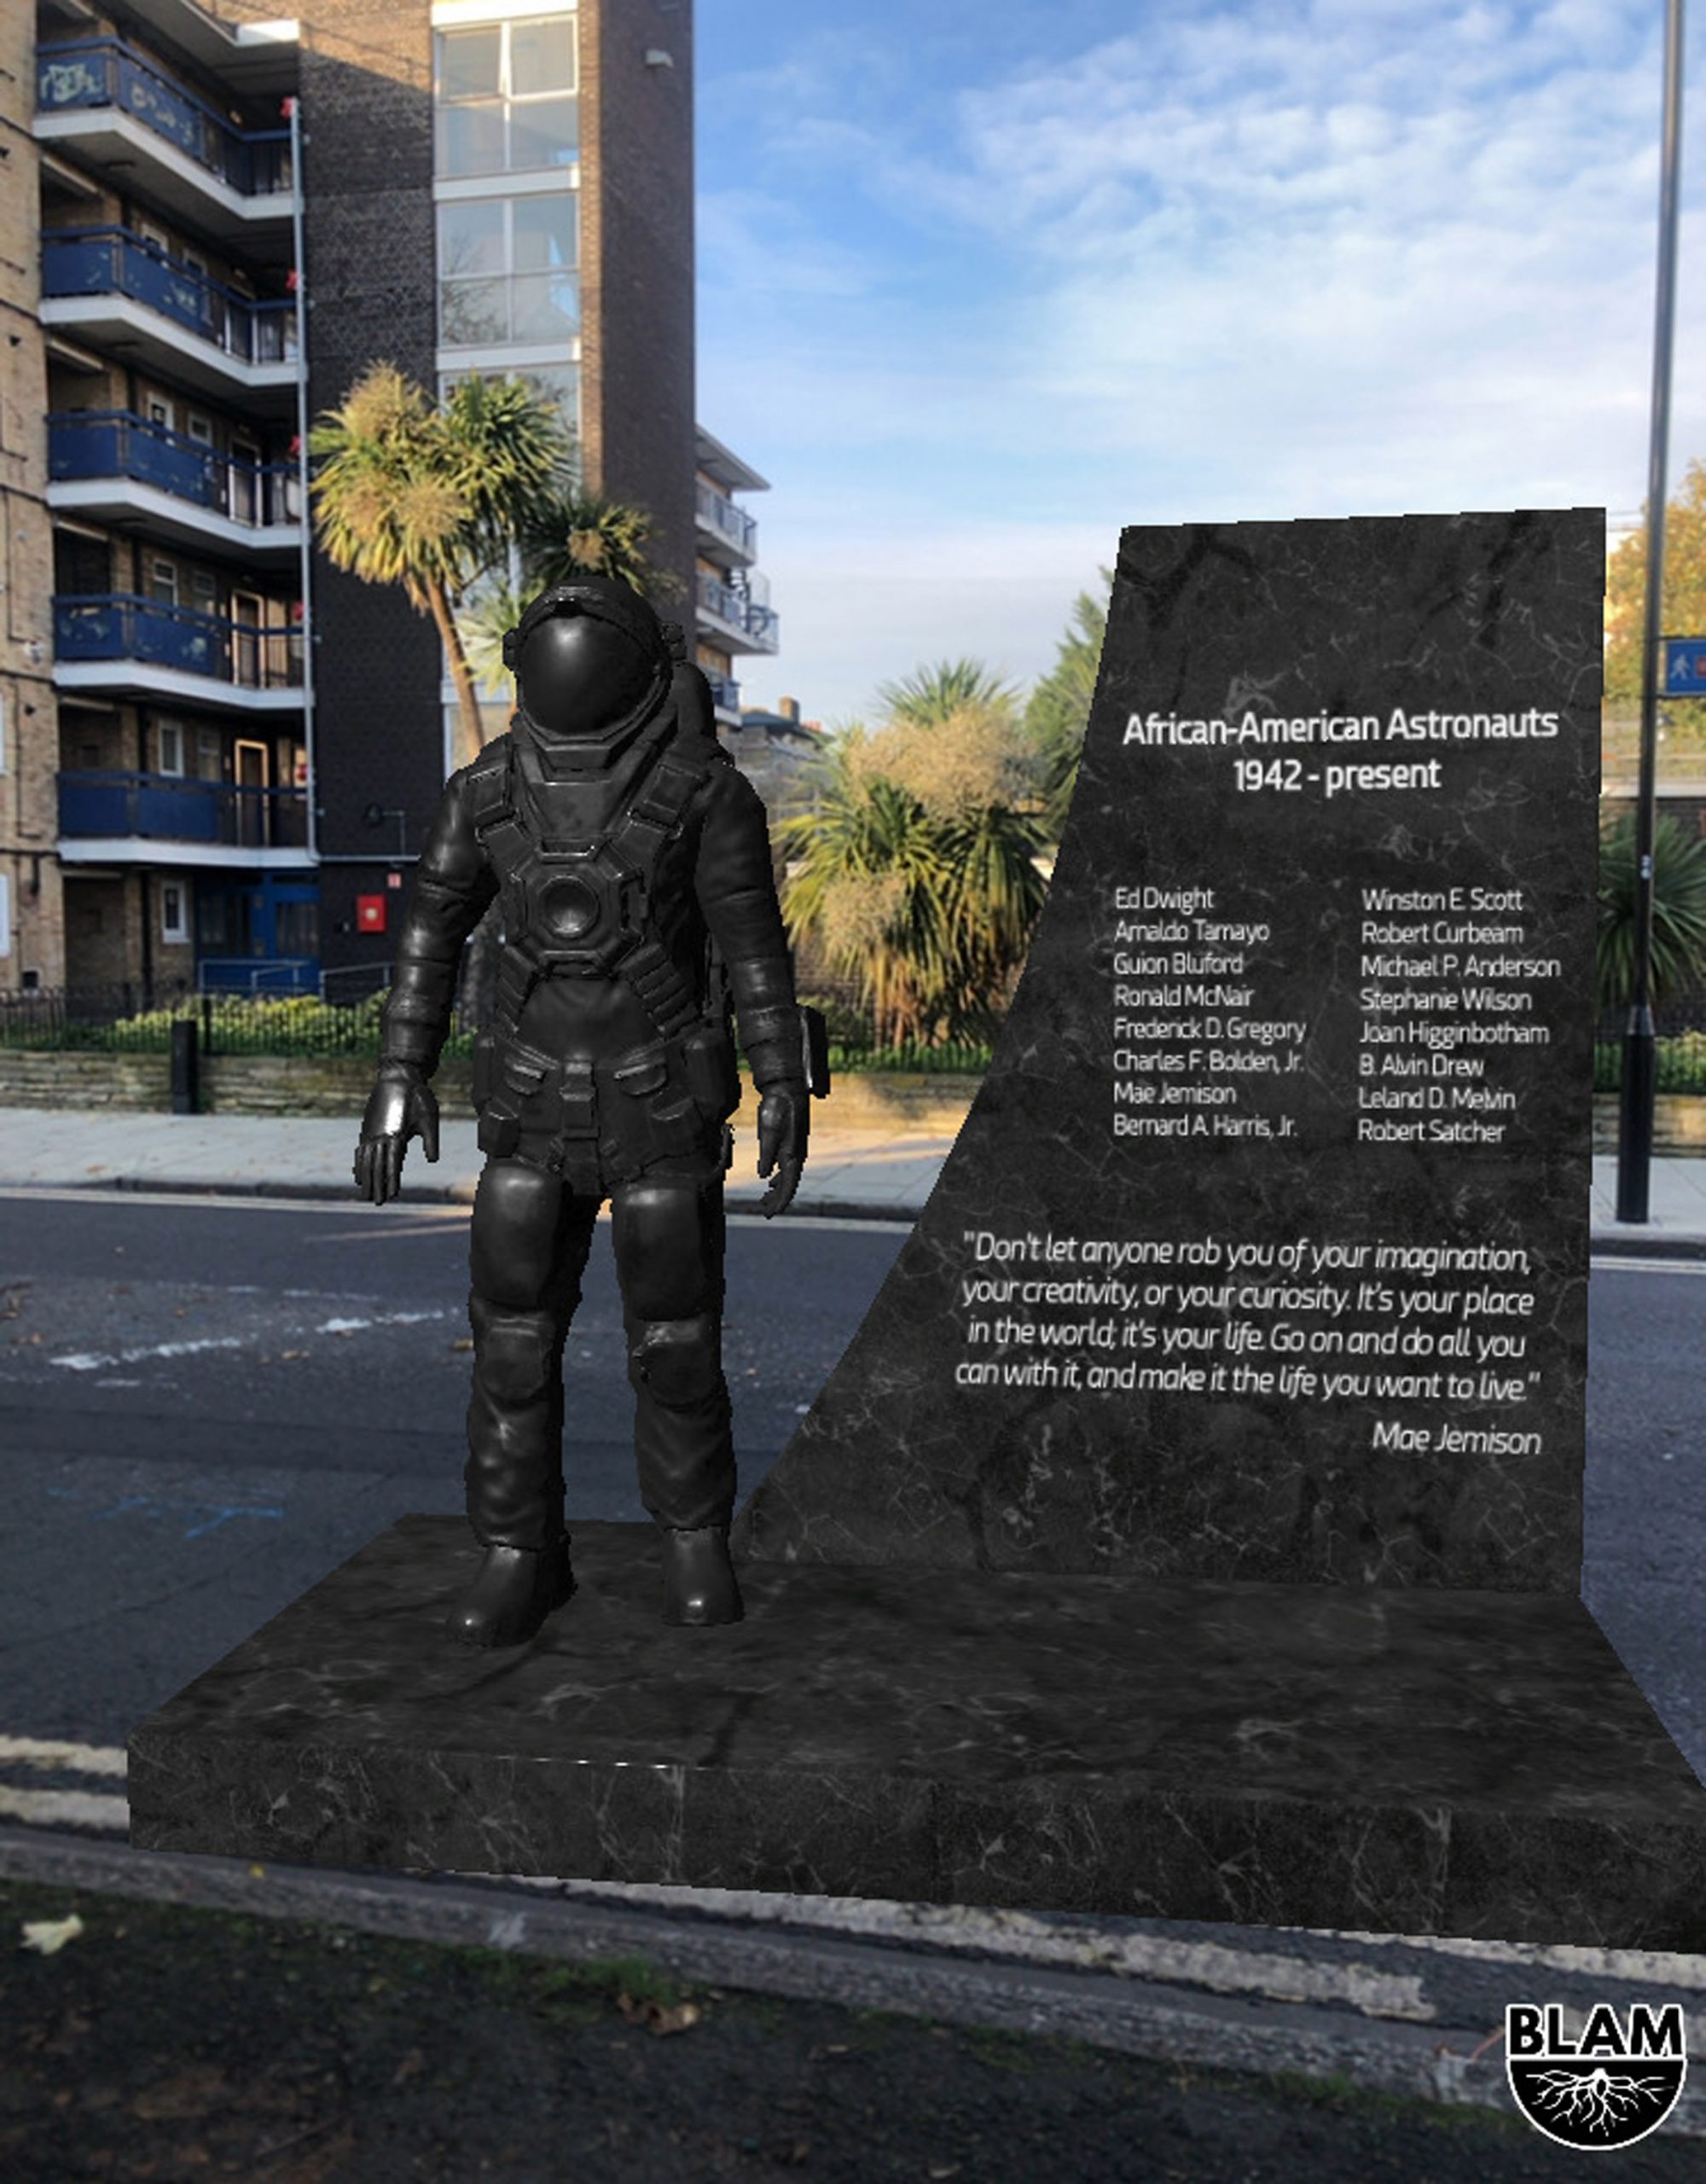 An AR monument for black astronauts from the BLAM Black history app